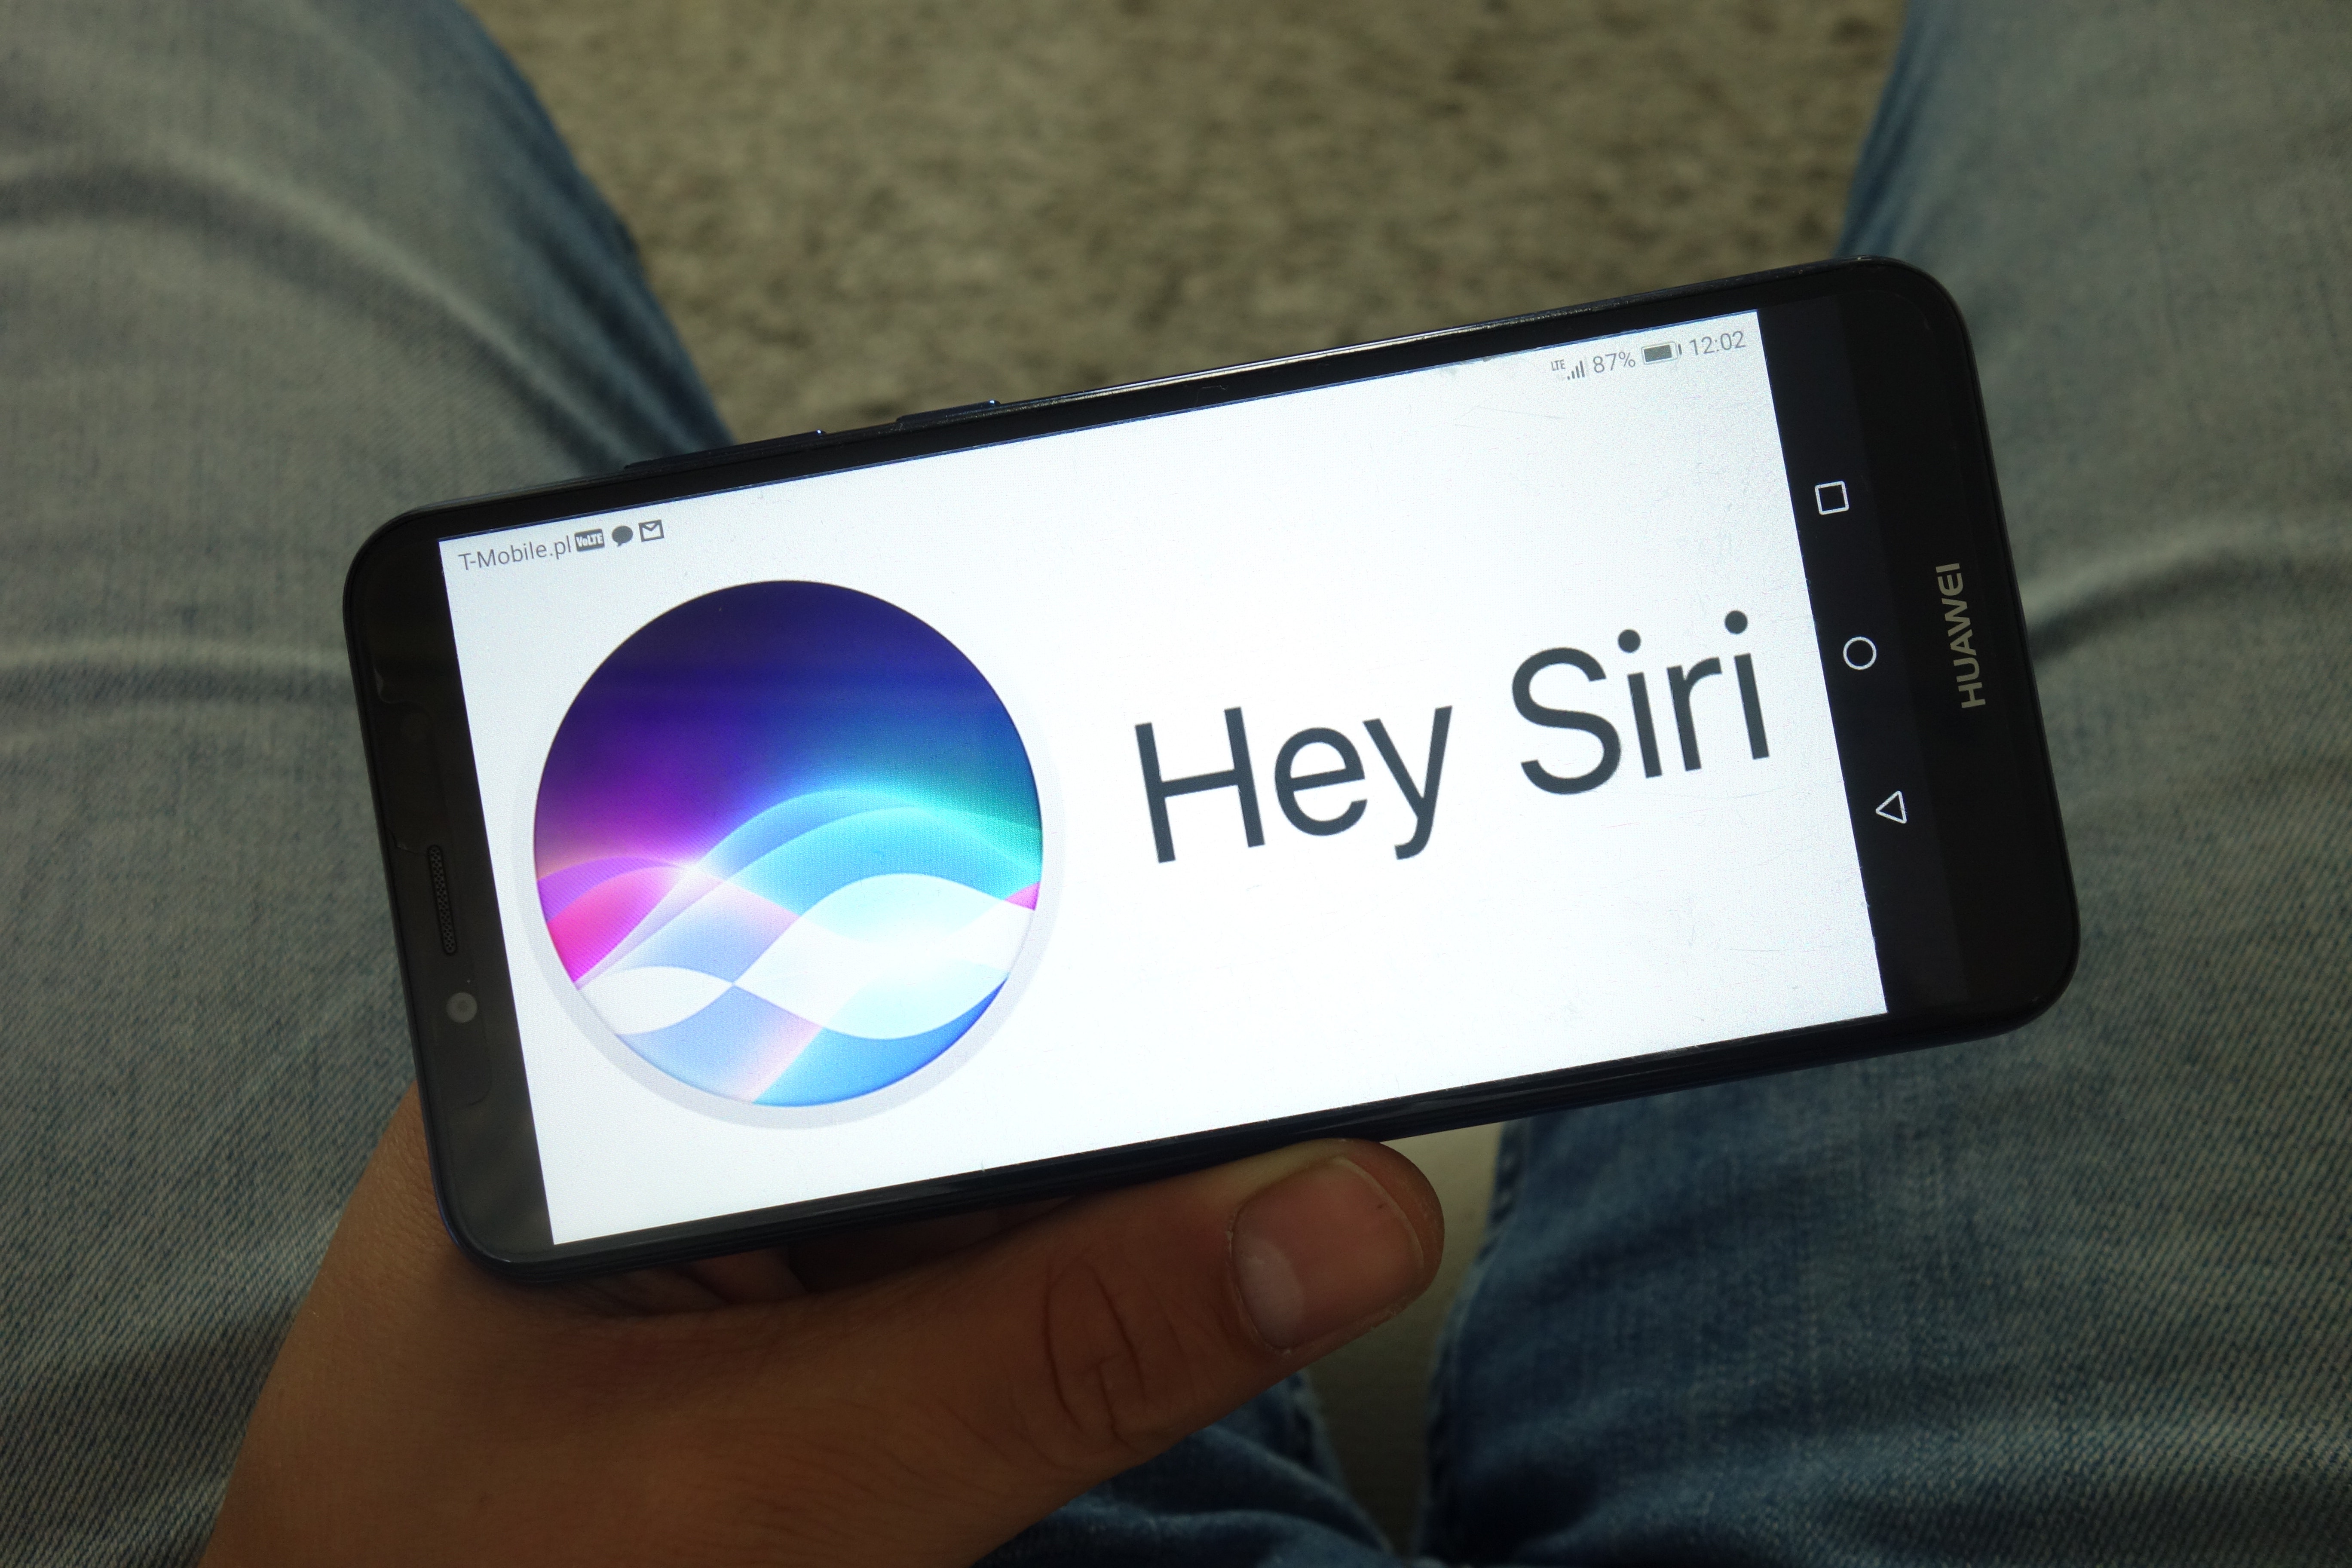 Tired Of Saying 'Hey Siri'? Apple Working To Shorten Wake Word For Personal Assistant